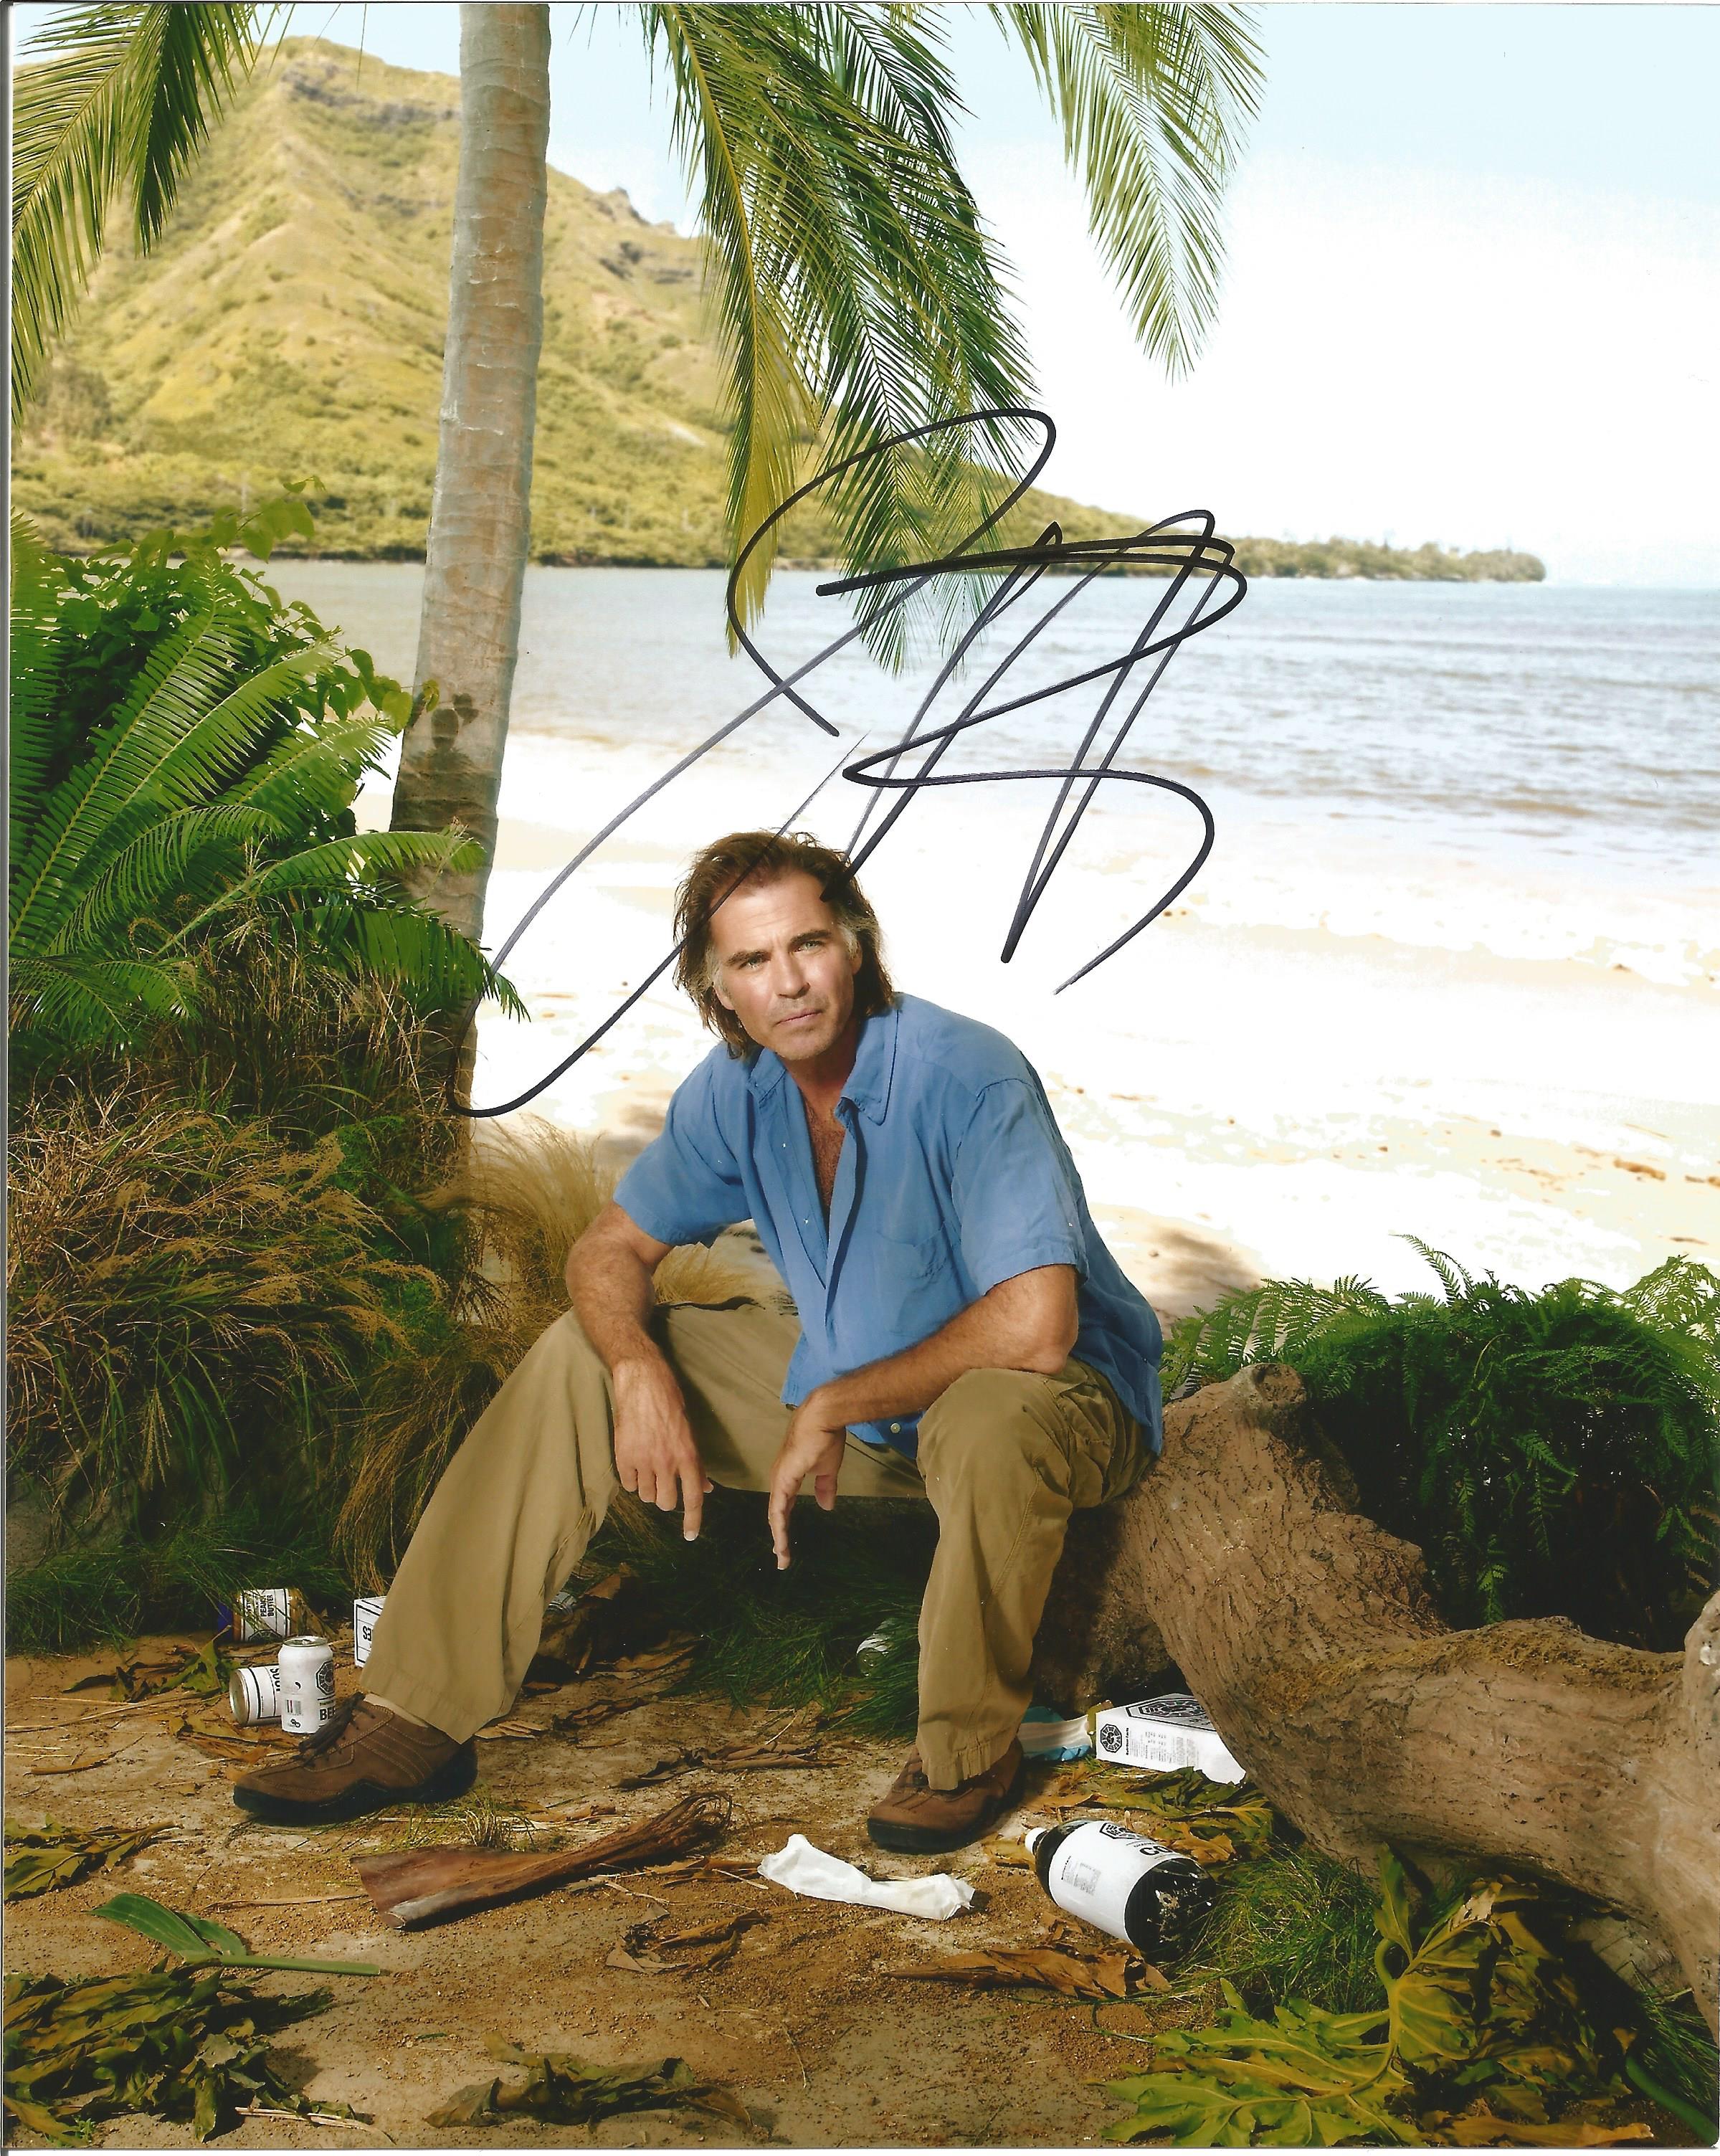 Jeff Fahey 10x8 signed colour photo pictured from the TV series Lost, Jeffrey David Fahey (born